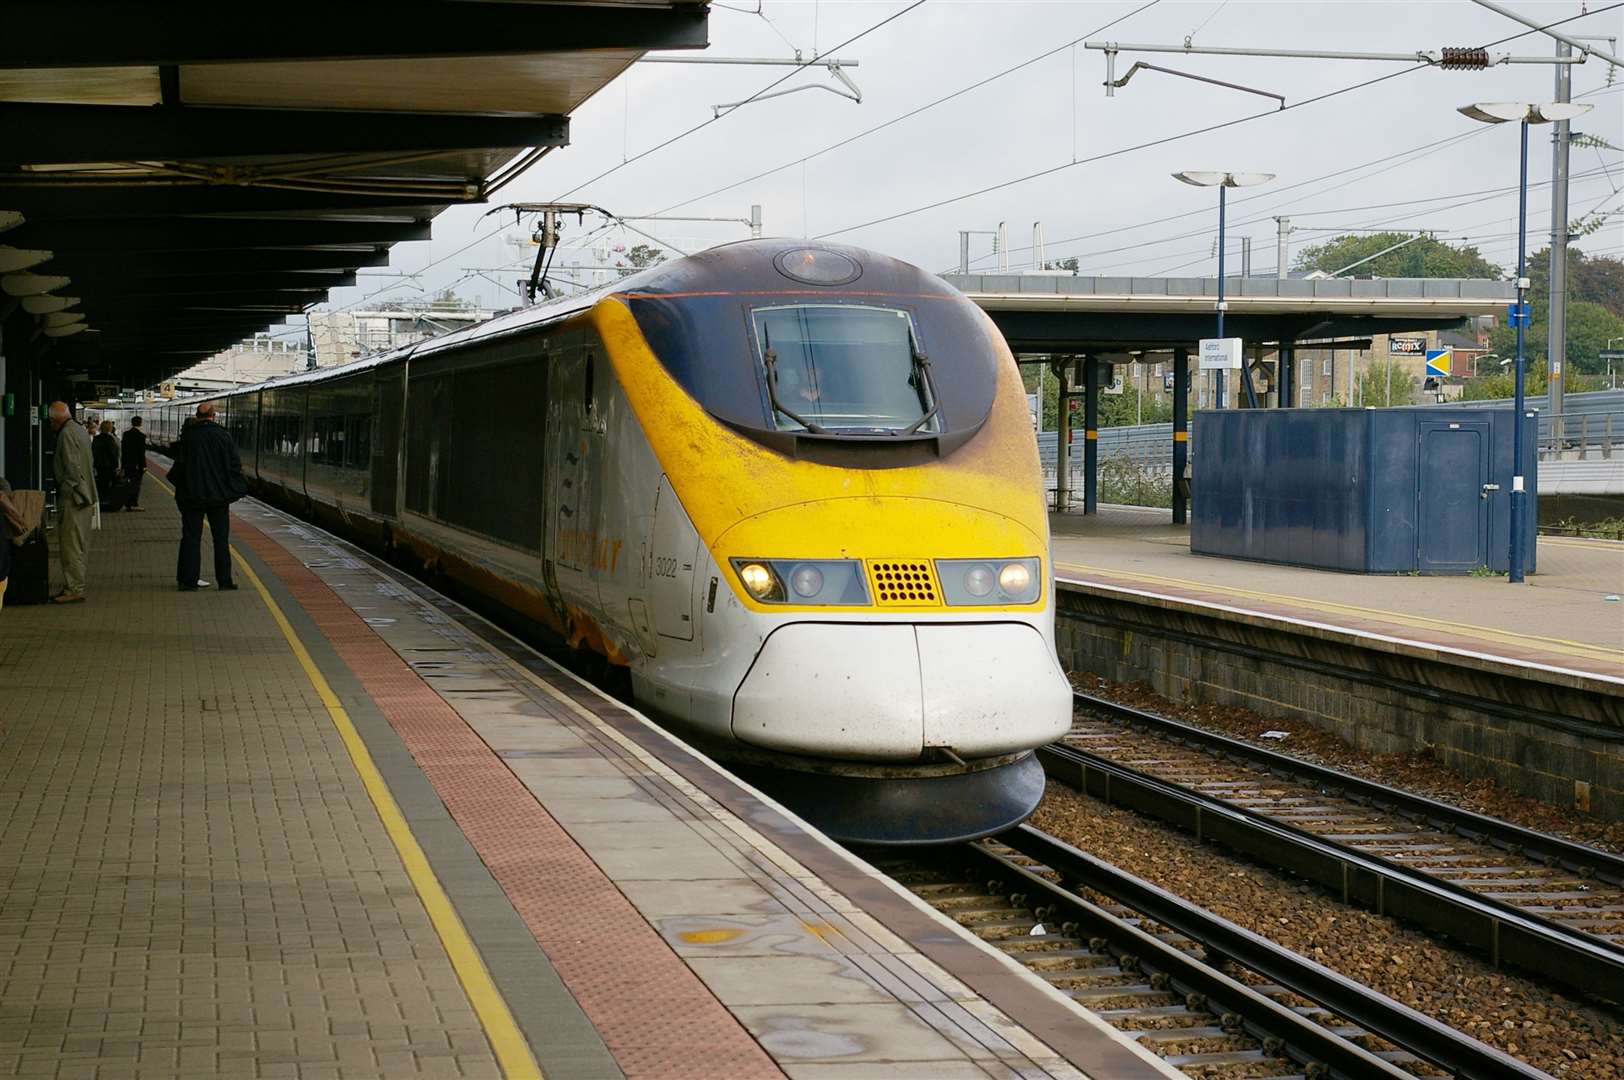 Eurostar's E300 Class 373 TMST train arrives at Ashford on a service to Paris Gare du Nord in 2005. Picture: Steve Salter